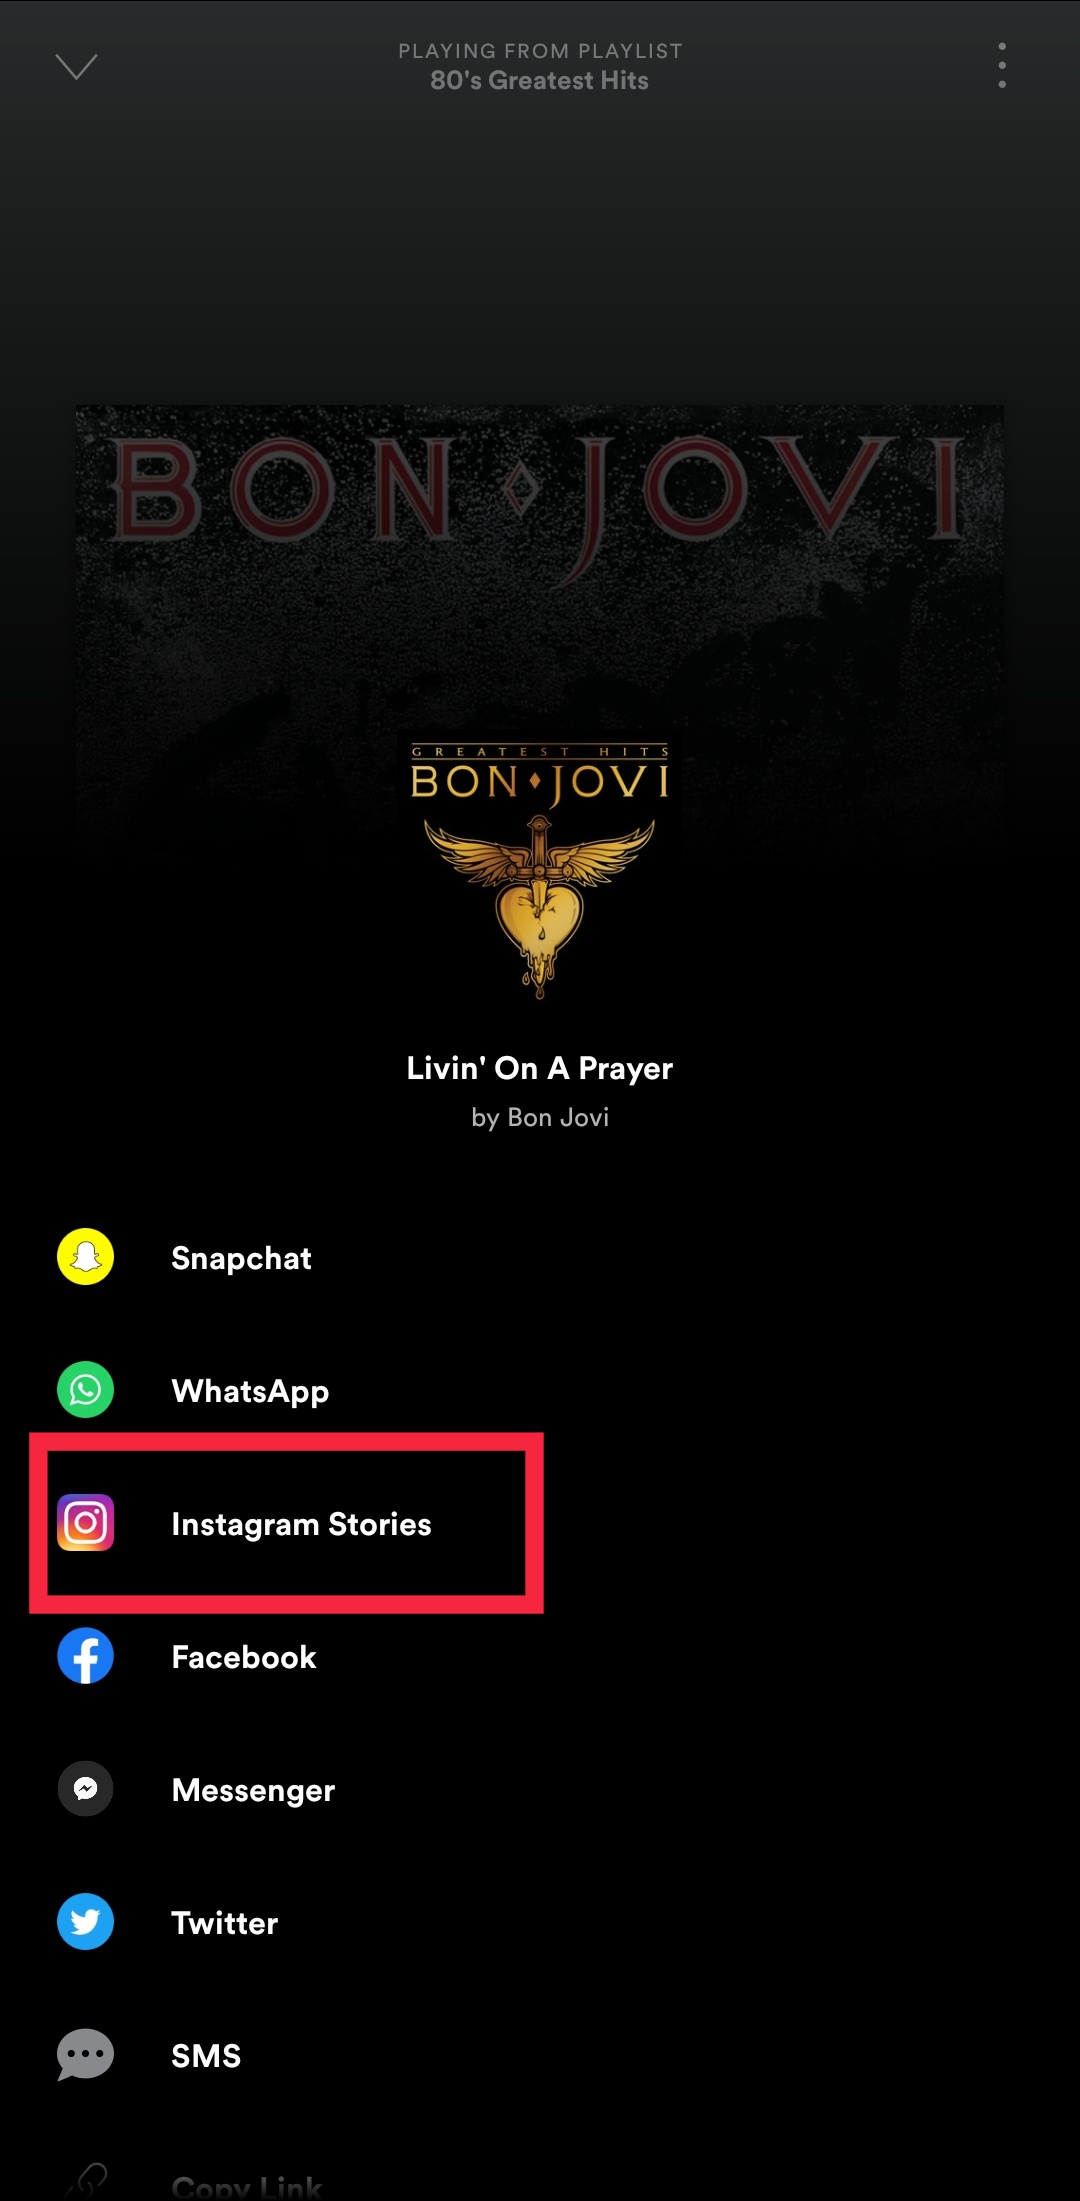 spotify share to instagram stories